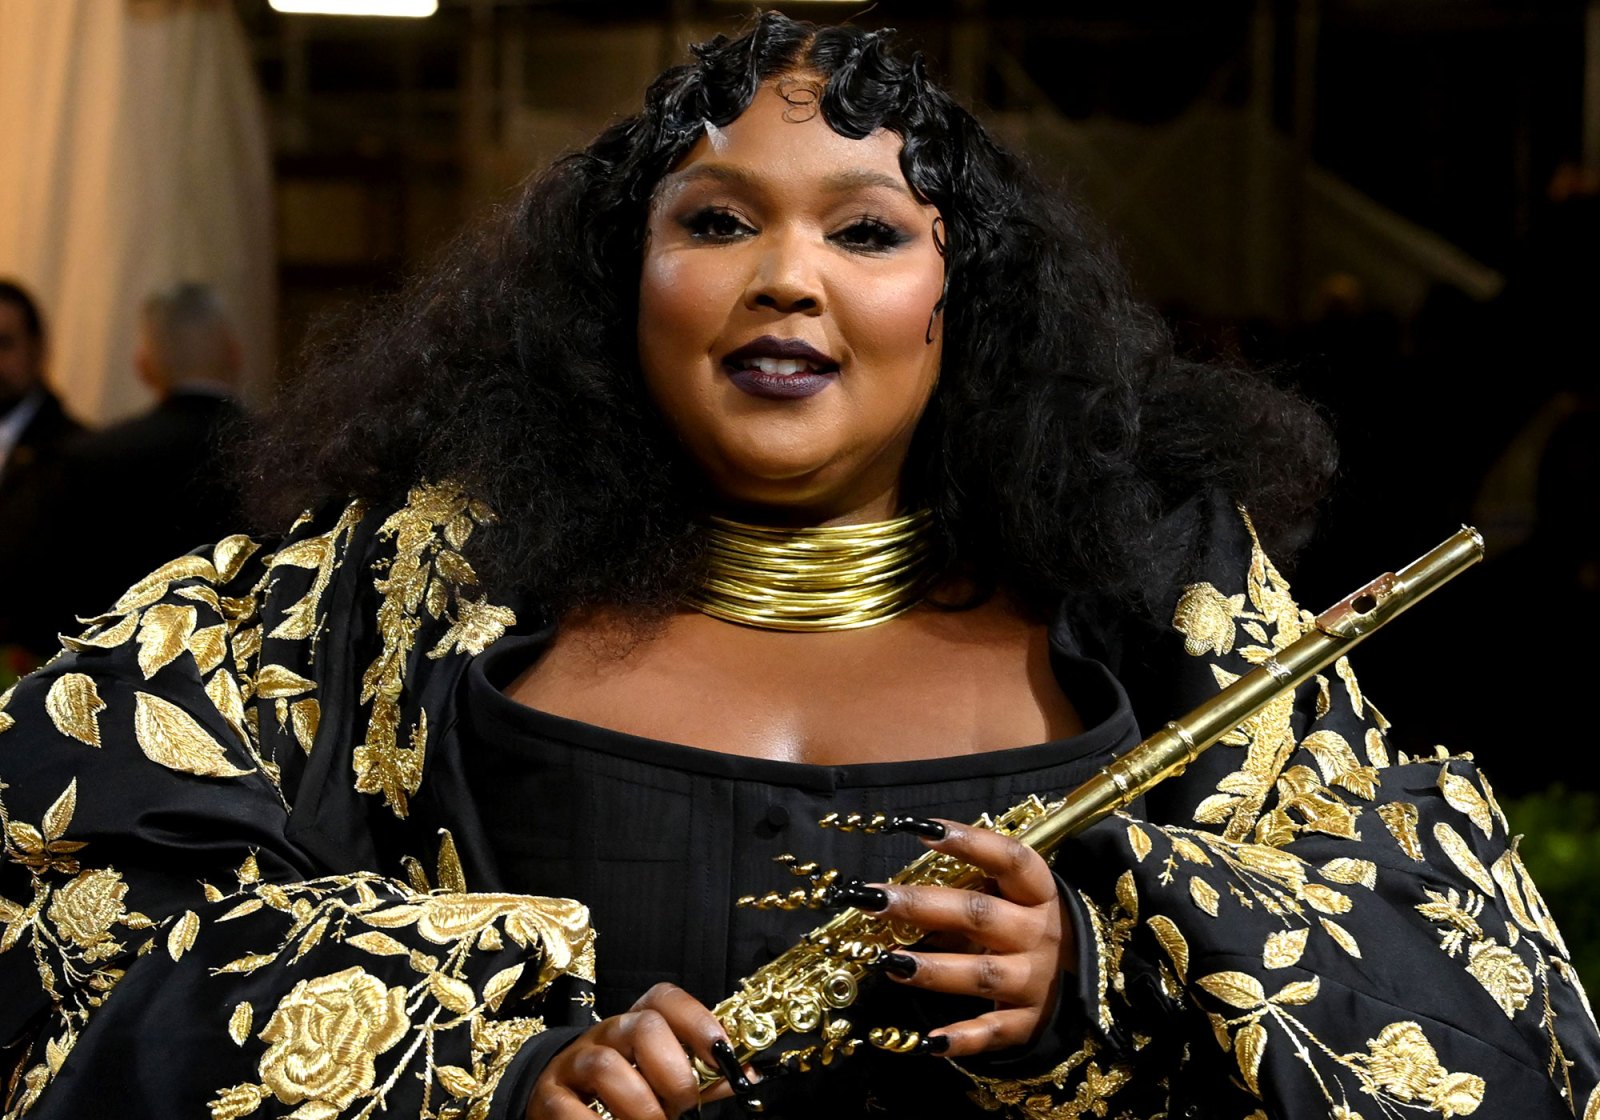 Gallery Update: Every Time Lizzo Used Her Platform to Preach Body Positivity and Inclusivity